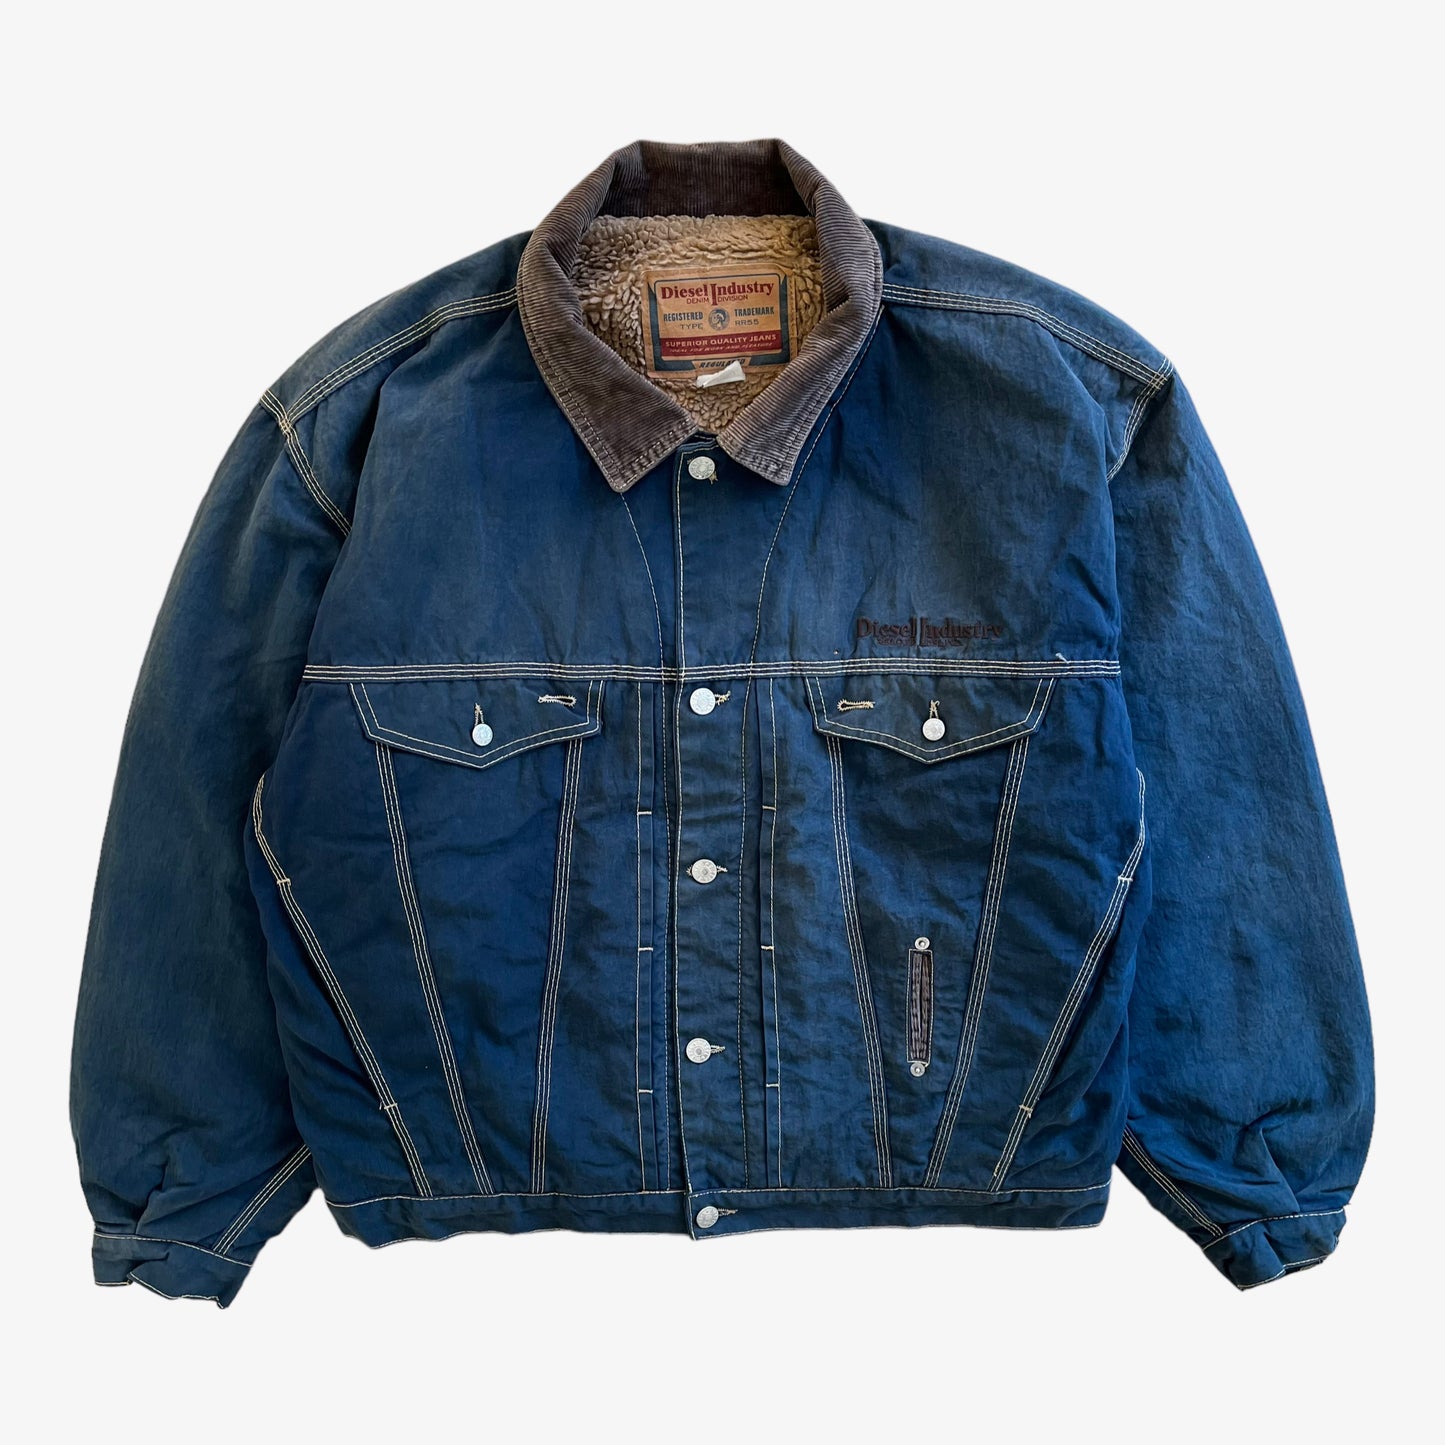 Vintage 90s Diesel Industry Trucker Jacket With Corduroy Collar And Sherpa Lining - Casspios Dream